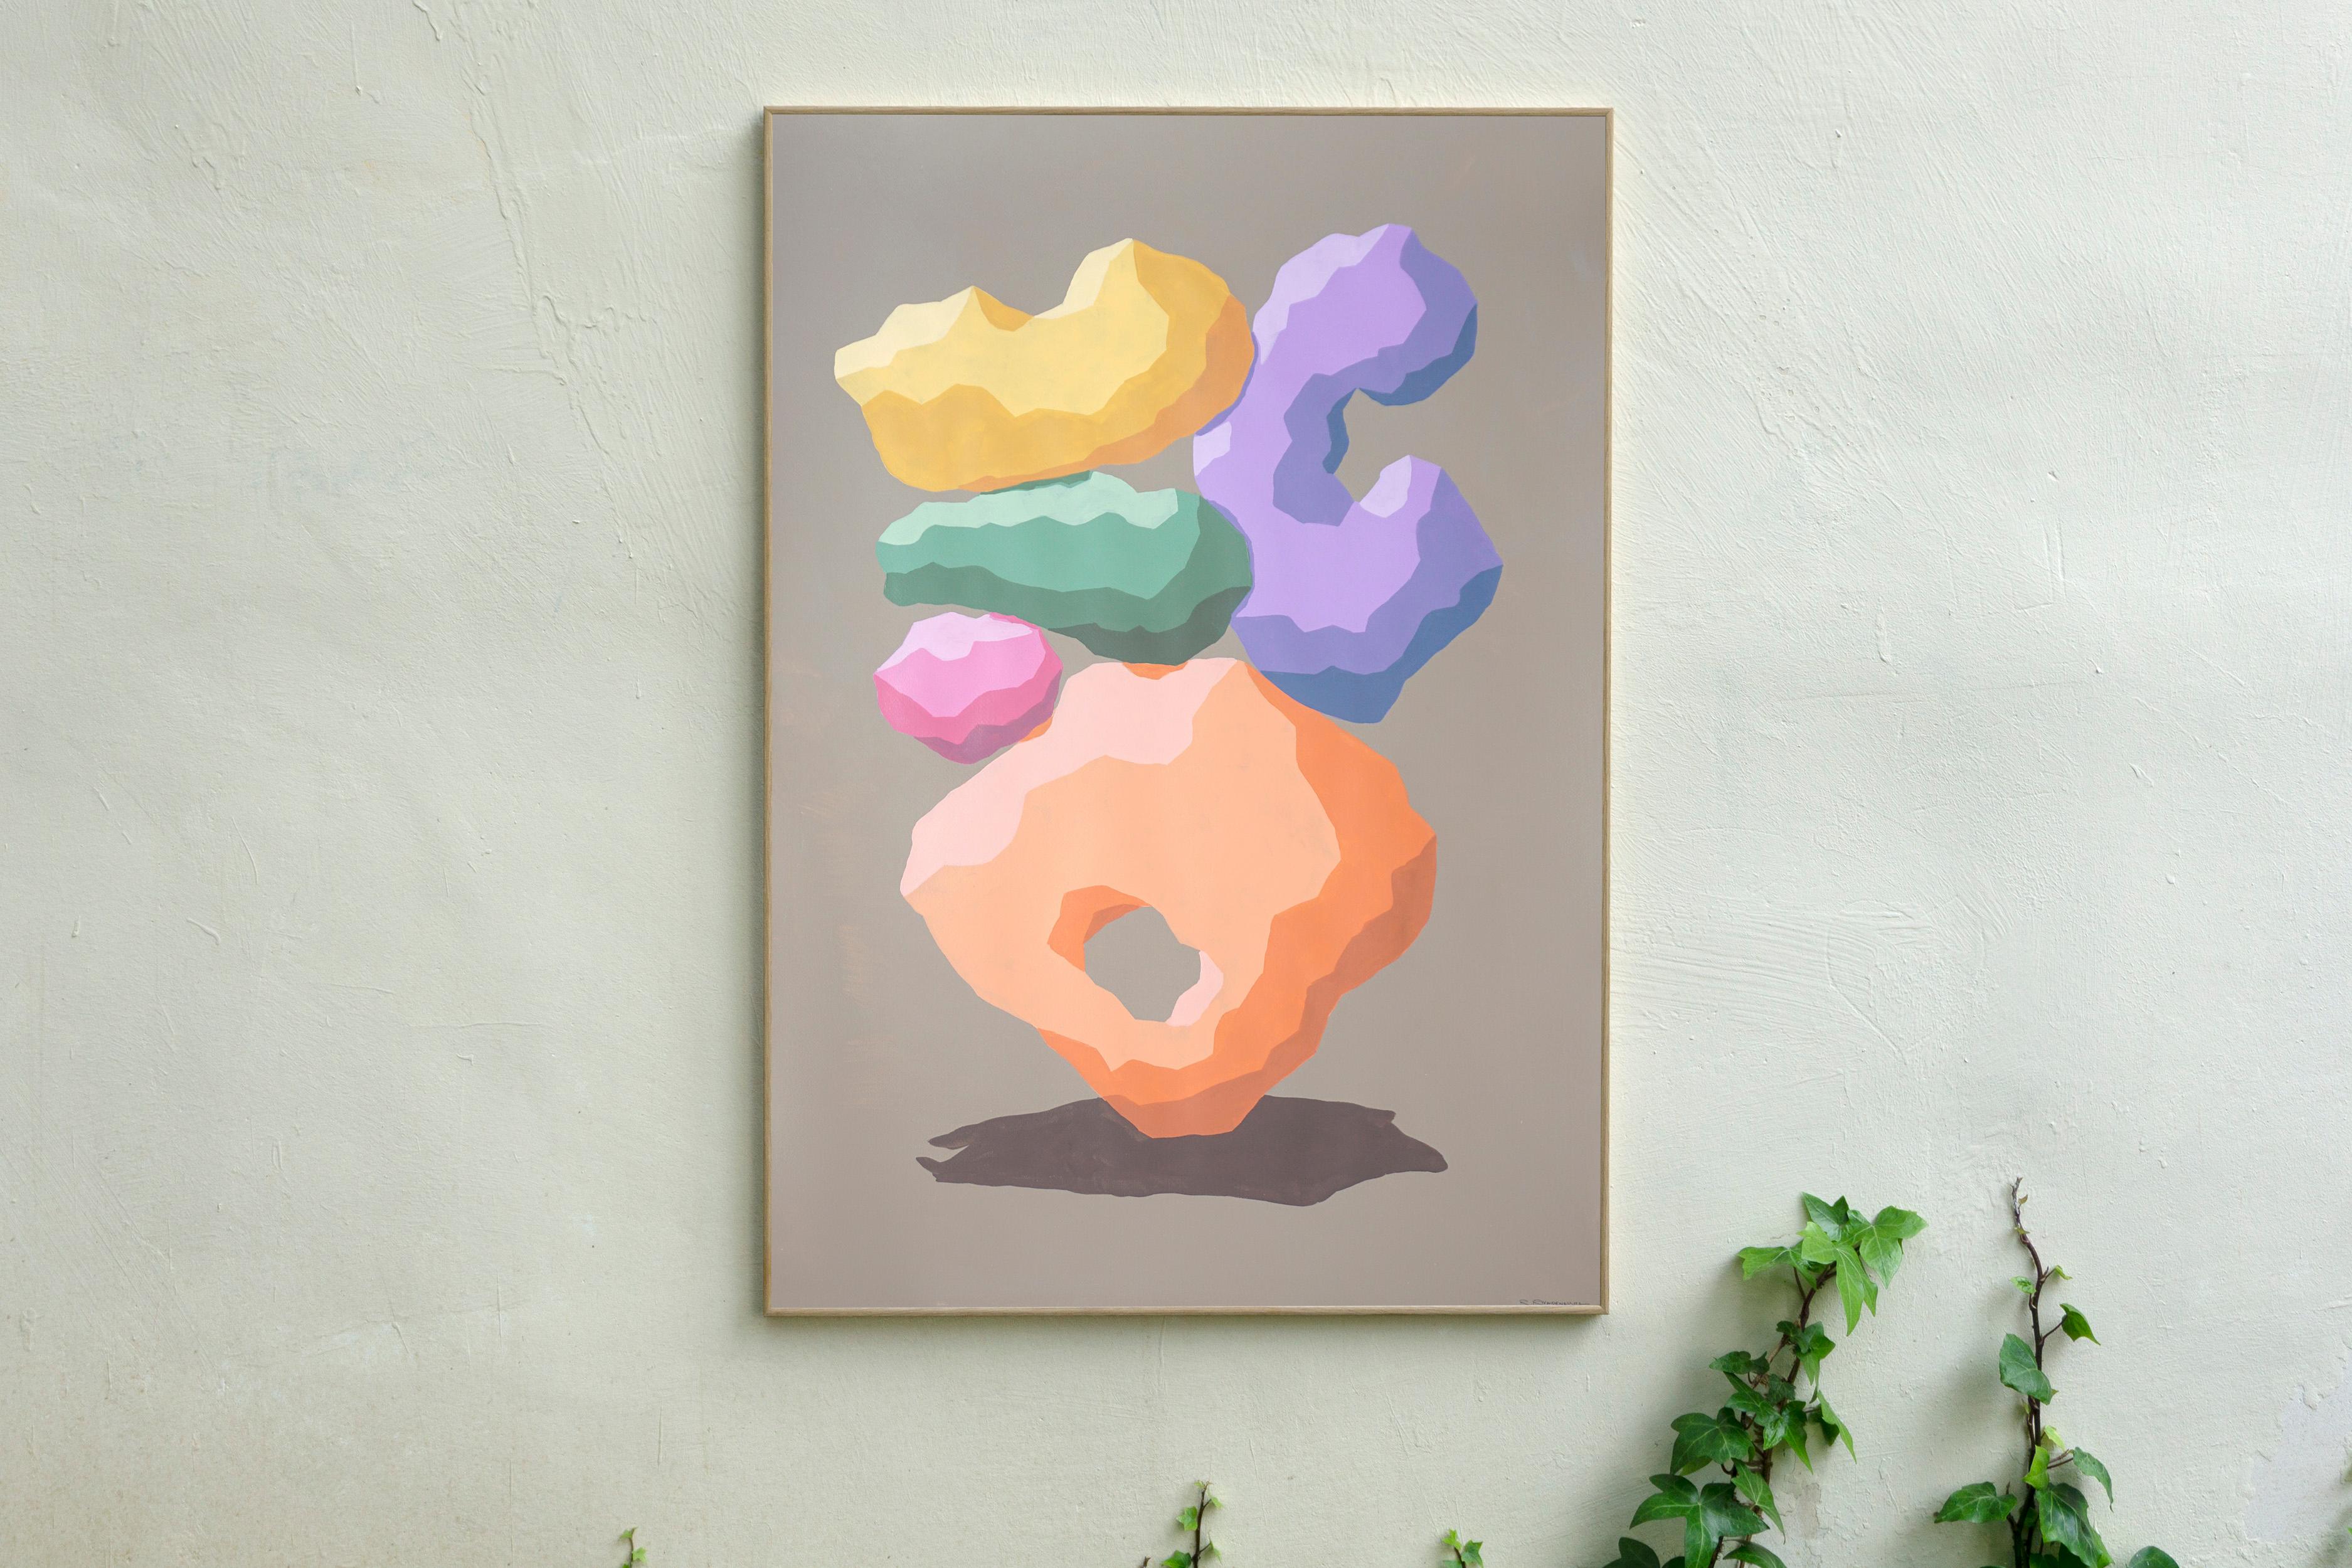 Modern Monument, 3D Totem Sculpture in Pastel Tones, Orange, Pink, Purple Shapes - Cubist Painting by Ryan Rivadeneyra